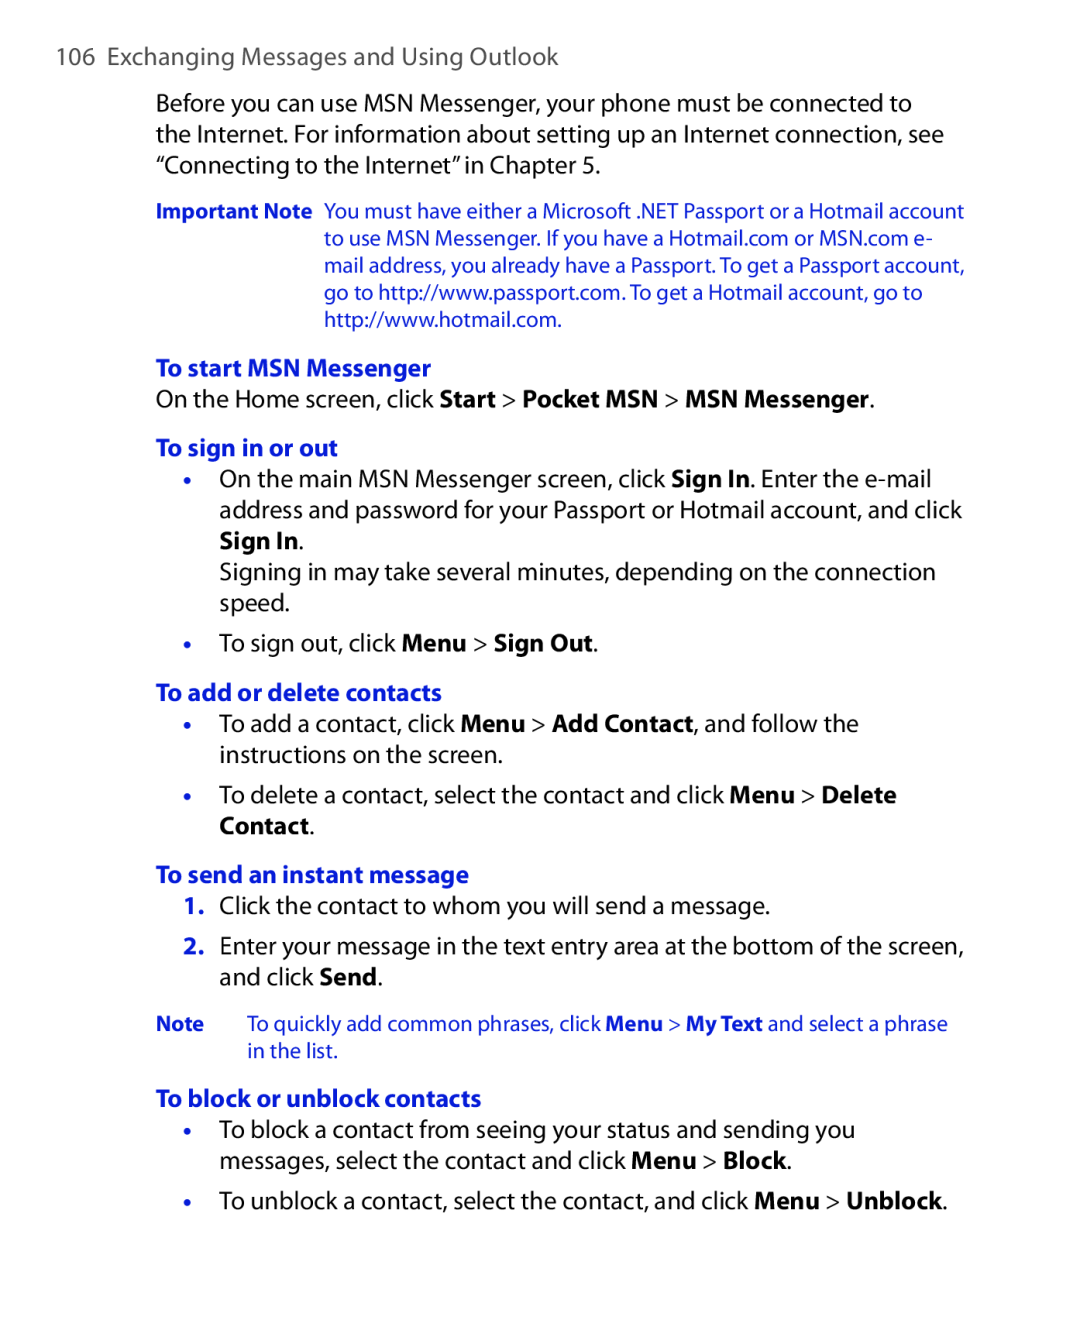 HTC HTC S621 user manual Exchanging Messages and Using Outlook, To start MSN Messenger, To sign in or out, Sign In, Contact 